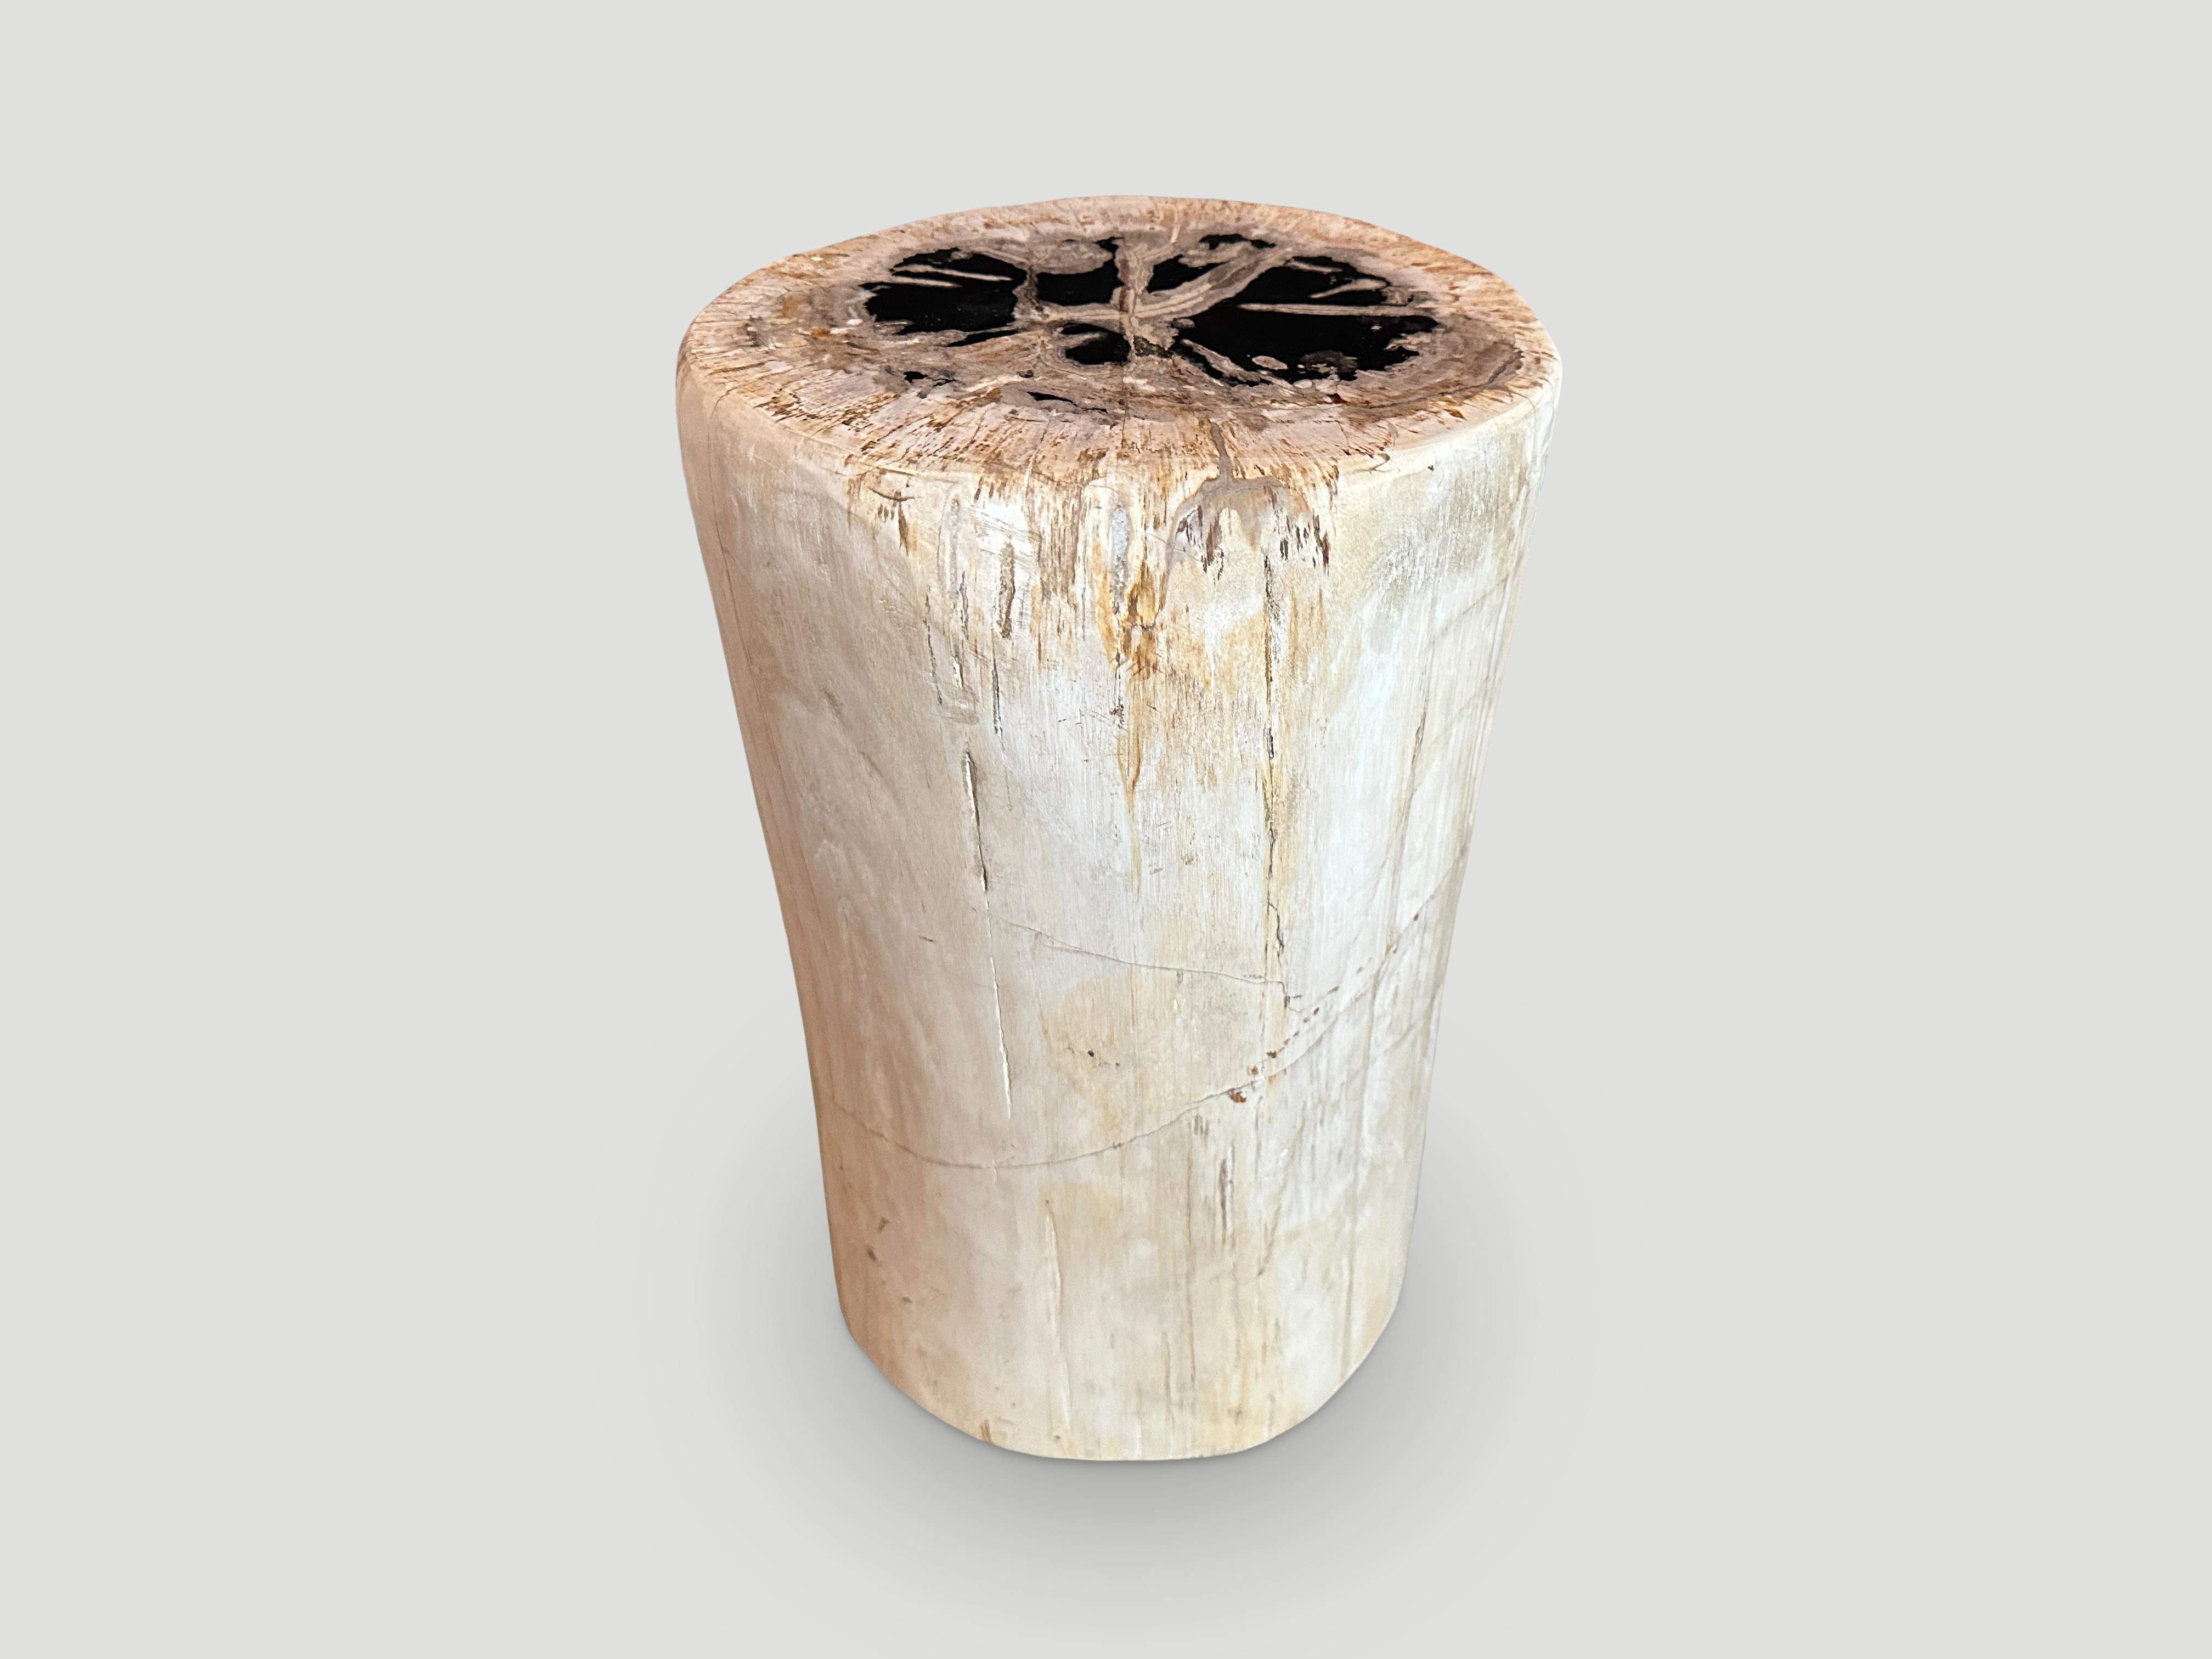 Beautiful contrasting tones on this high quality petrified wood side table. It’s fascinating how Mother Nature produces these exquisite 40 million year old petrified teak logs with such contrasting colors and natural patterns throughout. Modern yet